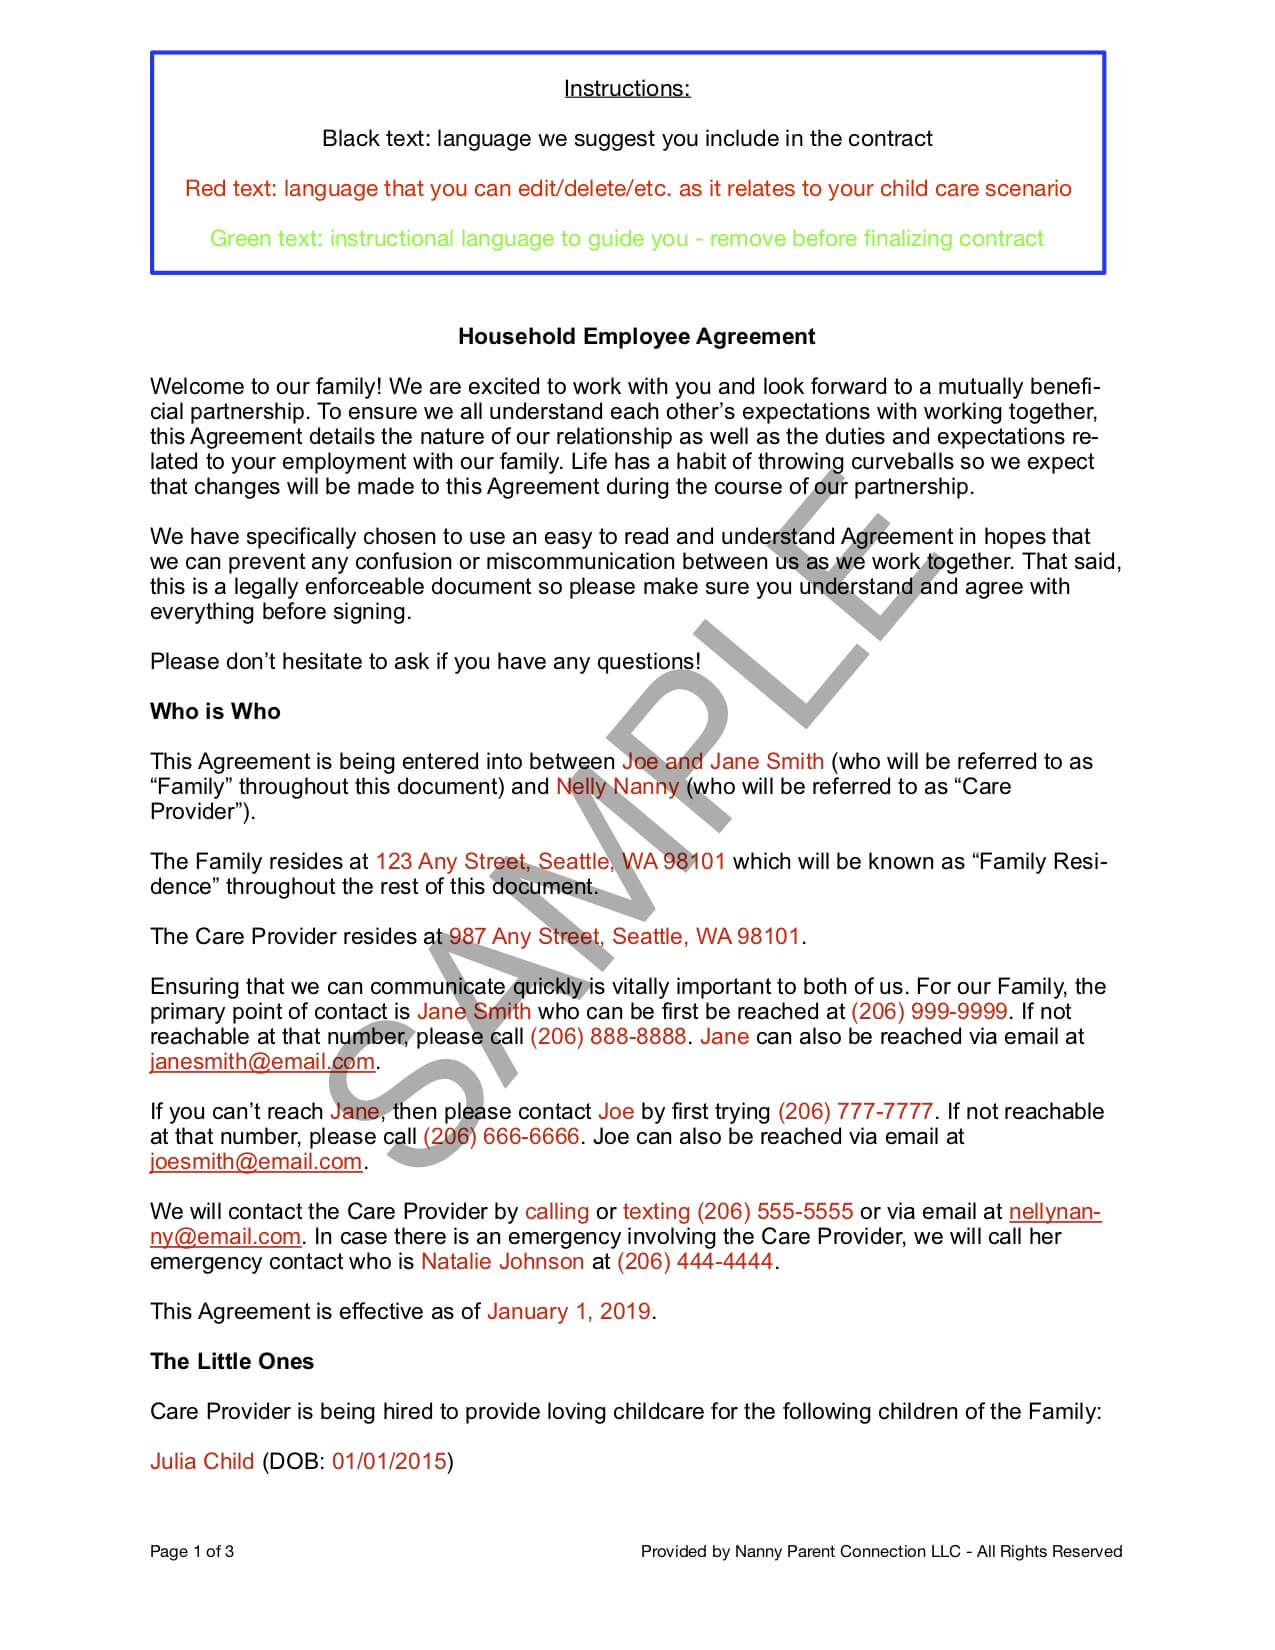 Household Employee Agreement | Nanny Parent Connection In Nanny Contract Template Word